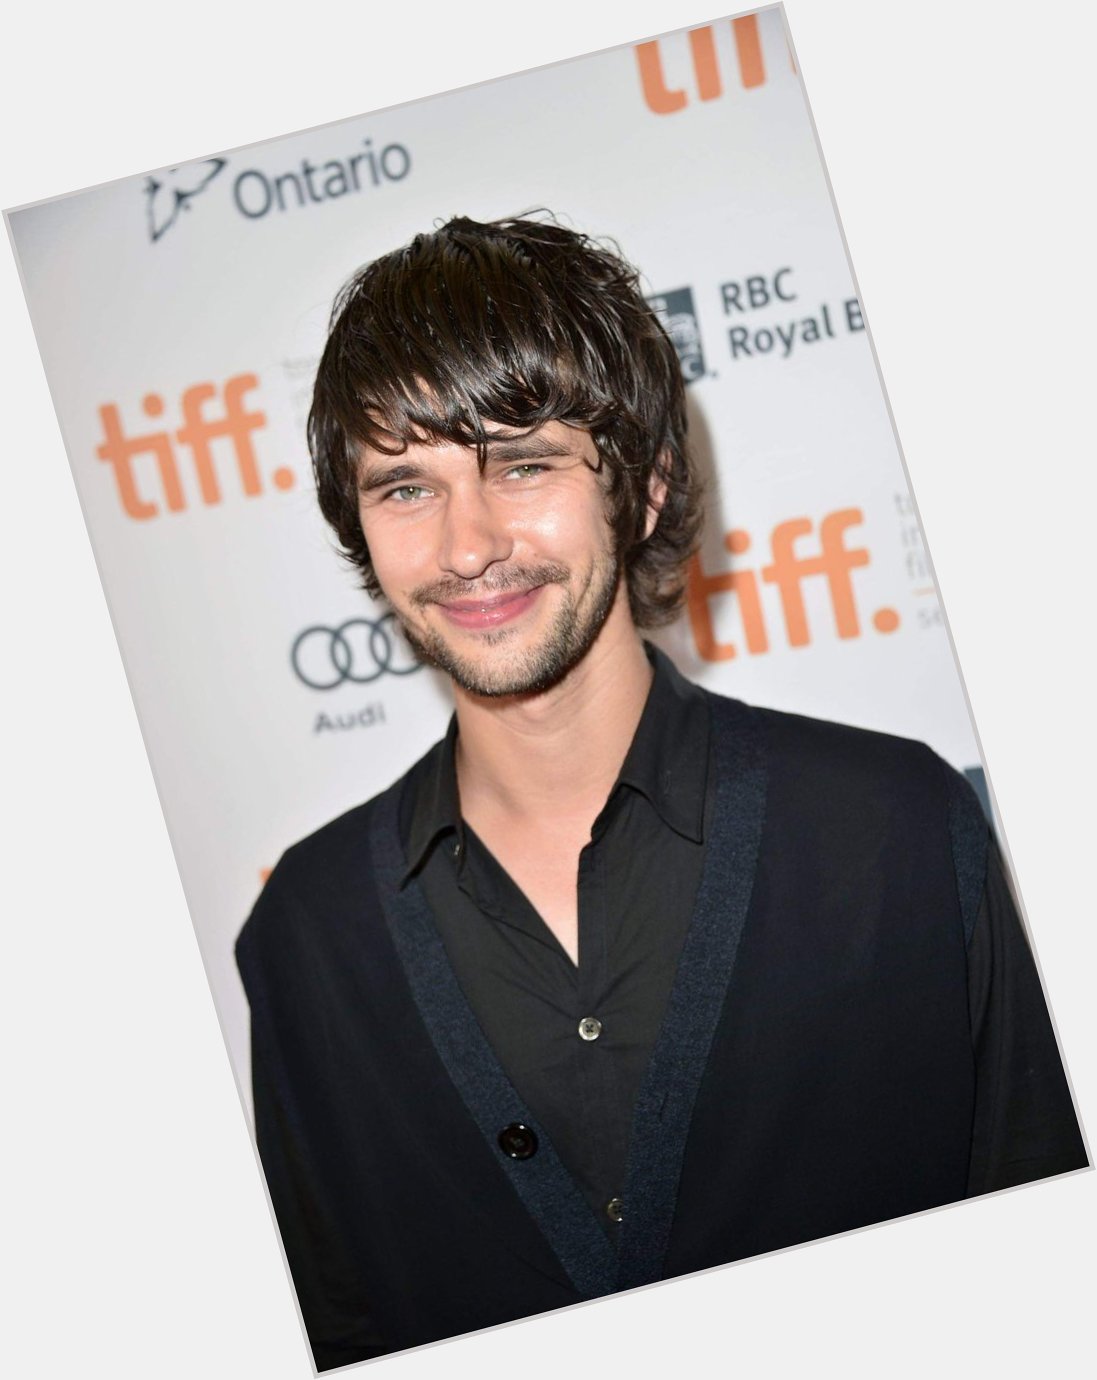 From,Clifton, Bedfordshire, England, UK,happy birthday to the good actor,Ben Whishaw,he turns.38 years today       